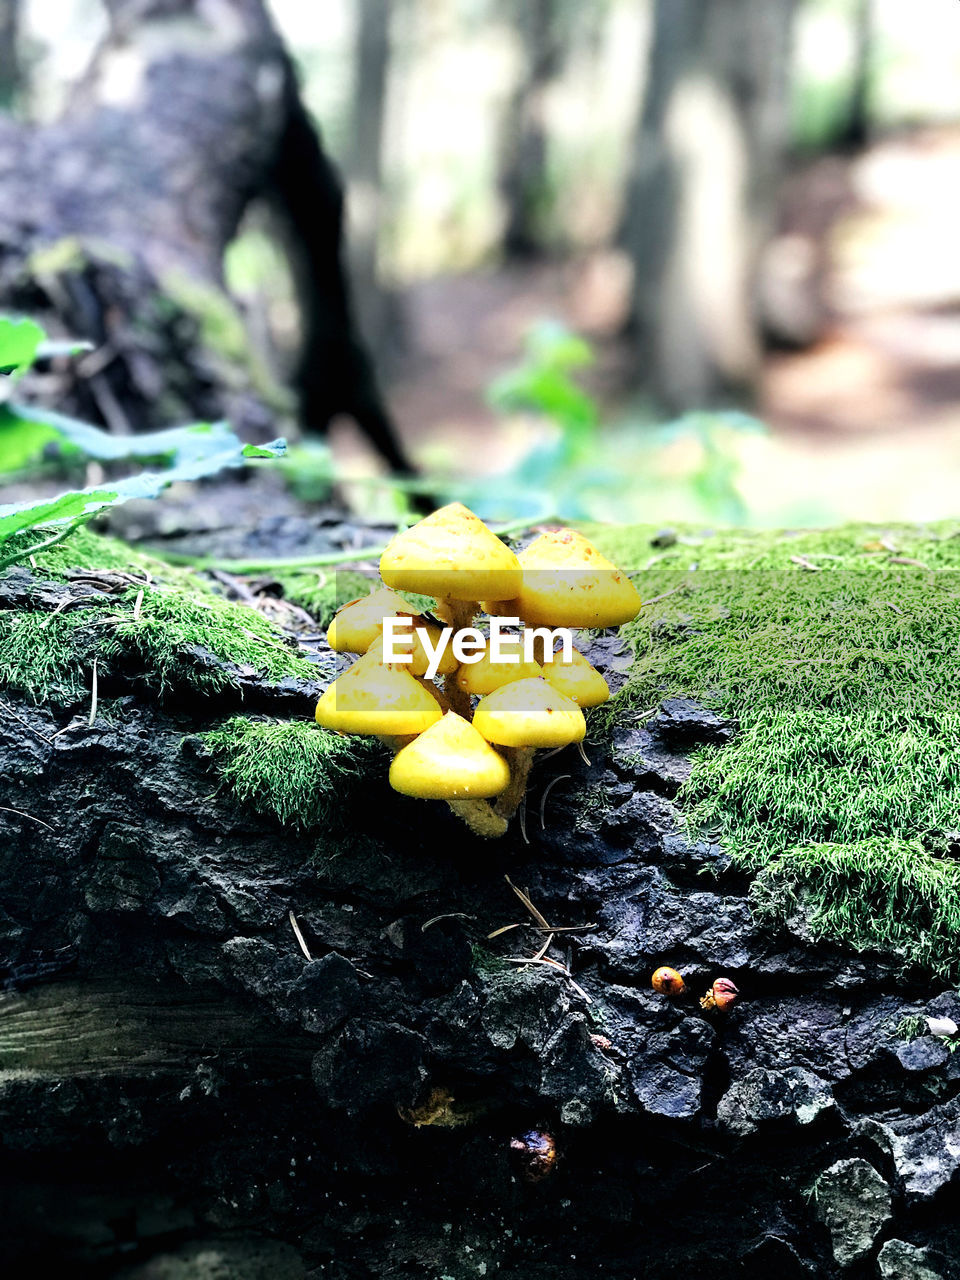 growth, plant, nature, day, tree, no people, trunk, close-up, tree trunk, focus on foreground, yellow, moss, fungus, food, beauty in nature, land, vegetable, outdoors, selective focus, mushroom, toadstool, lichen, bark